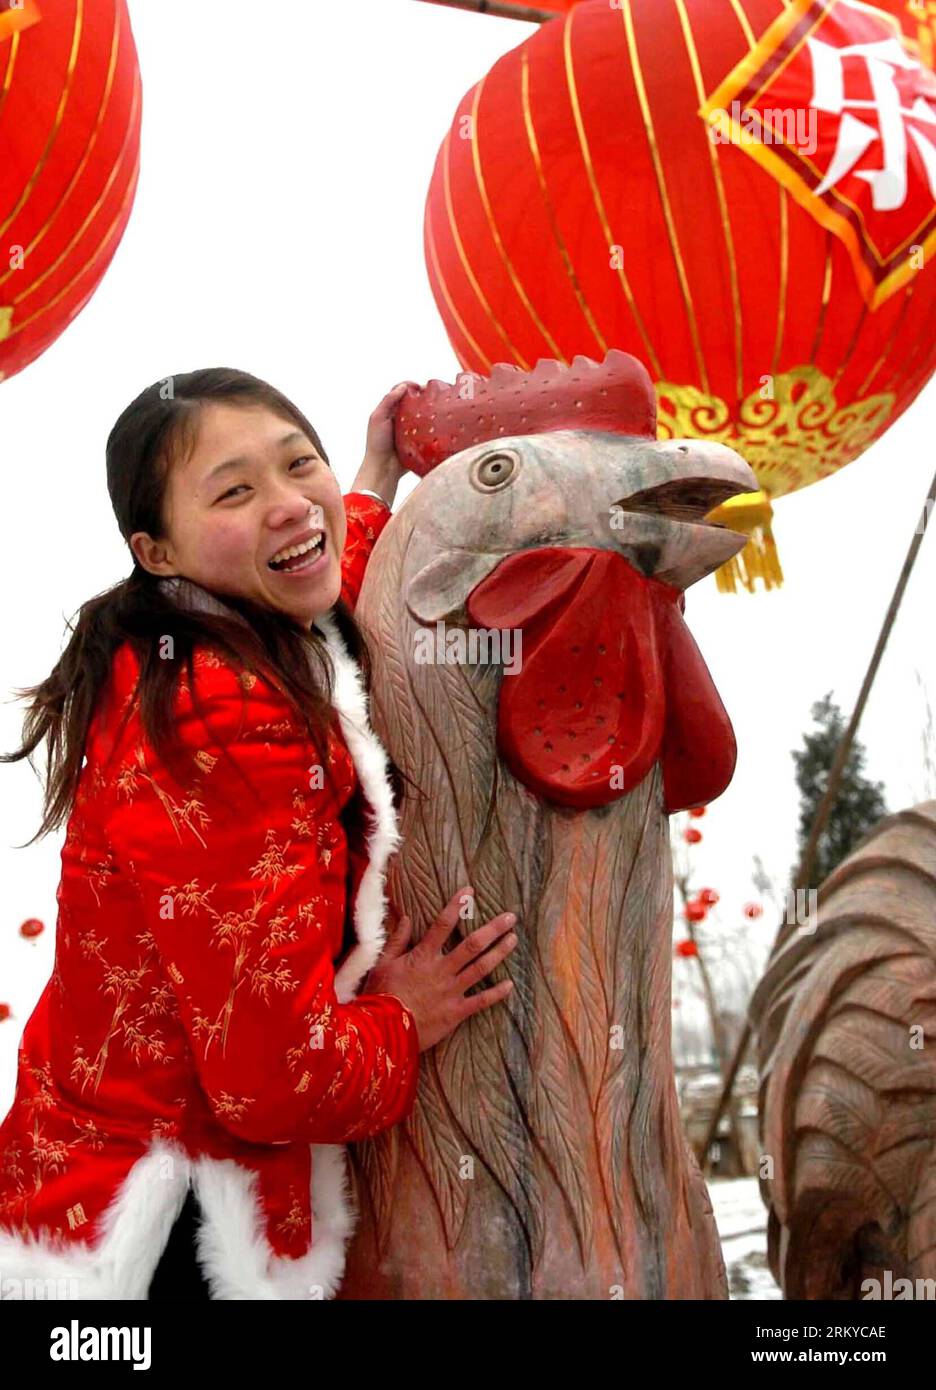 Bildnummer: 59195393  Datum: 09.02.2013  Copyright: imago/Xinhua (130209) -- ZHENGZHOU, Feb. 09, 2013 (Xinhua) -- File photo taken on Feb. 9, 2005 shows a woman posing for a photo with a stone sculpture of rooster at a temple fair in Zhengzhou, capital of central China s Henan Province. 2005 was the Year of the Rooster in the Chinese Zodiac. Chinese Zodiac is represented by 12 animals to record the years and reflect people s attributes, including the rat, ox, tiger, rabbit, dragon, snake, horse, sheep, monkey, rooster, dog and pig.(Xinhua/Wang Song) (mp) CHINA-LUNAR NEW YEAR-CHINESE ZODIAC (CN Stock Photo